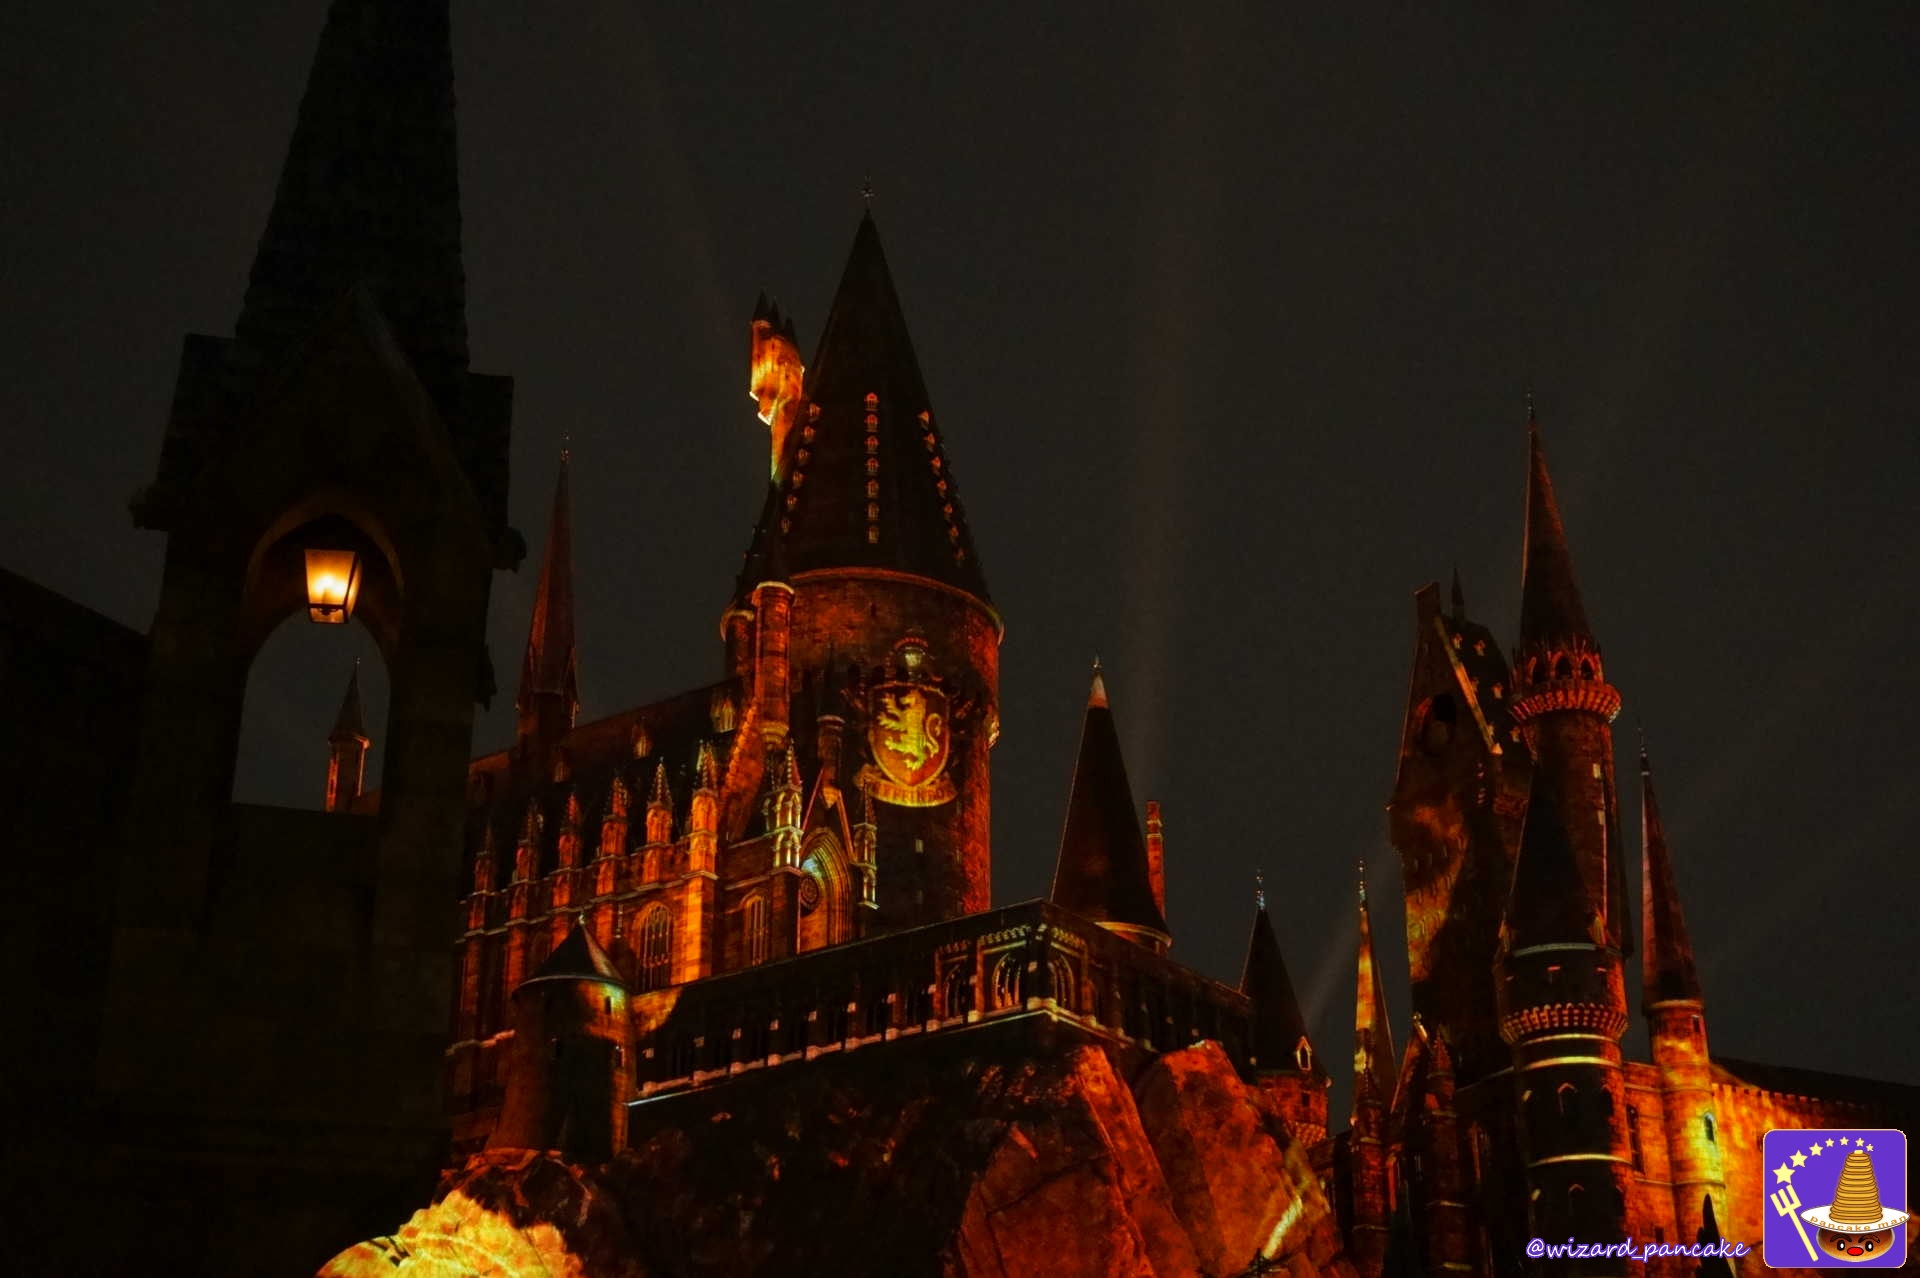 New night show 'Hogwarts Magical Celebration' New Castle Show 20 Mar - 4 Nov 2019 Projection mapping.